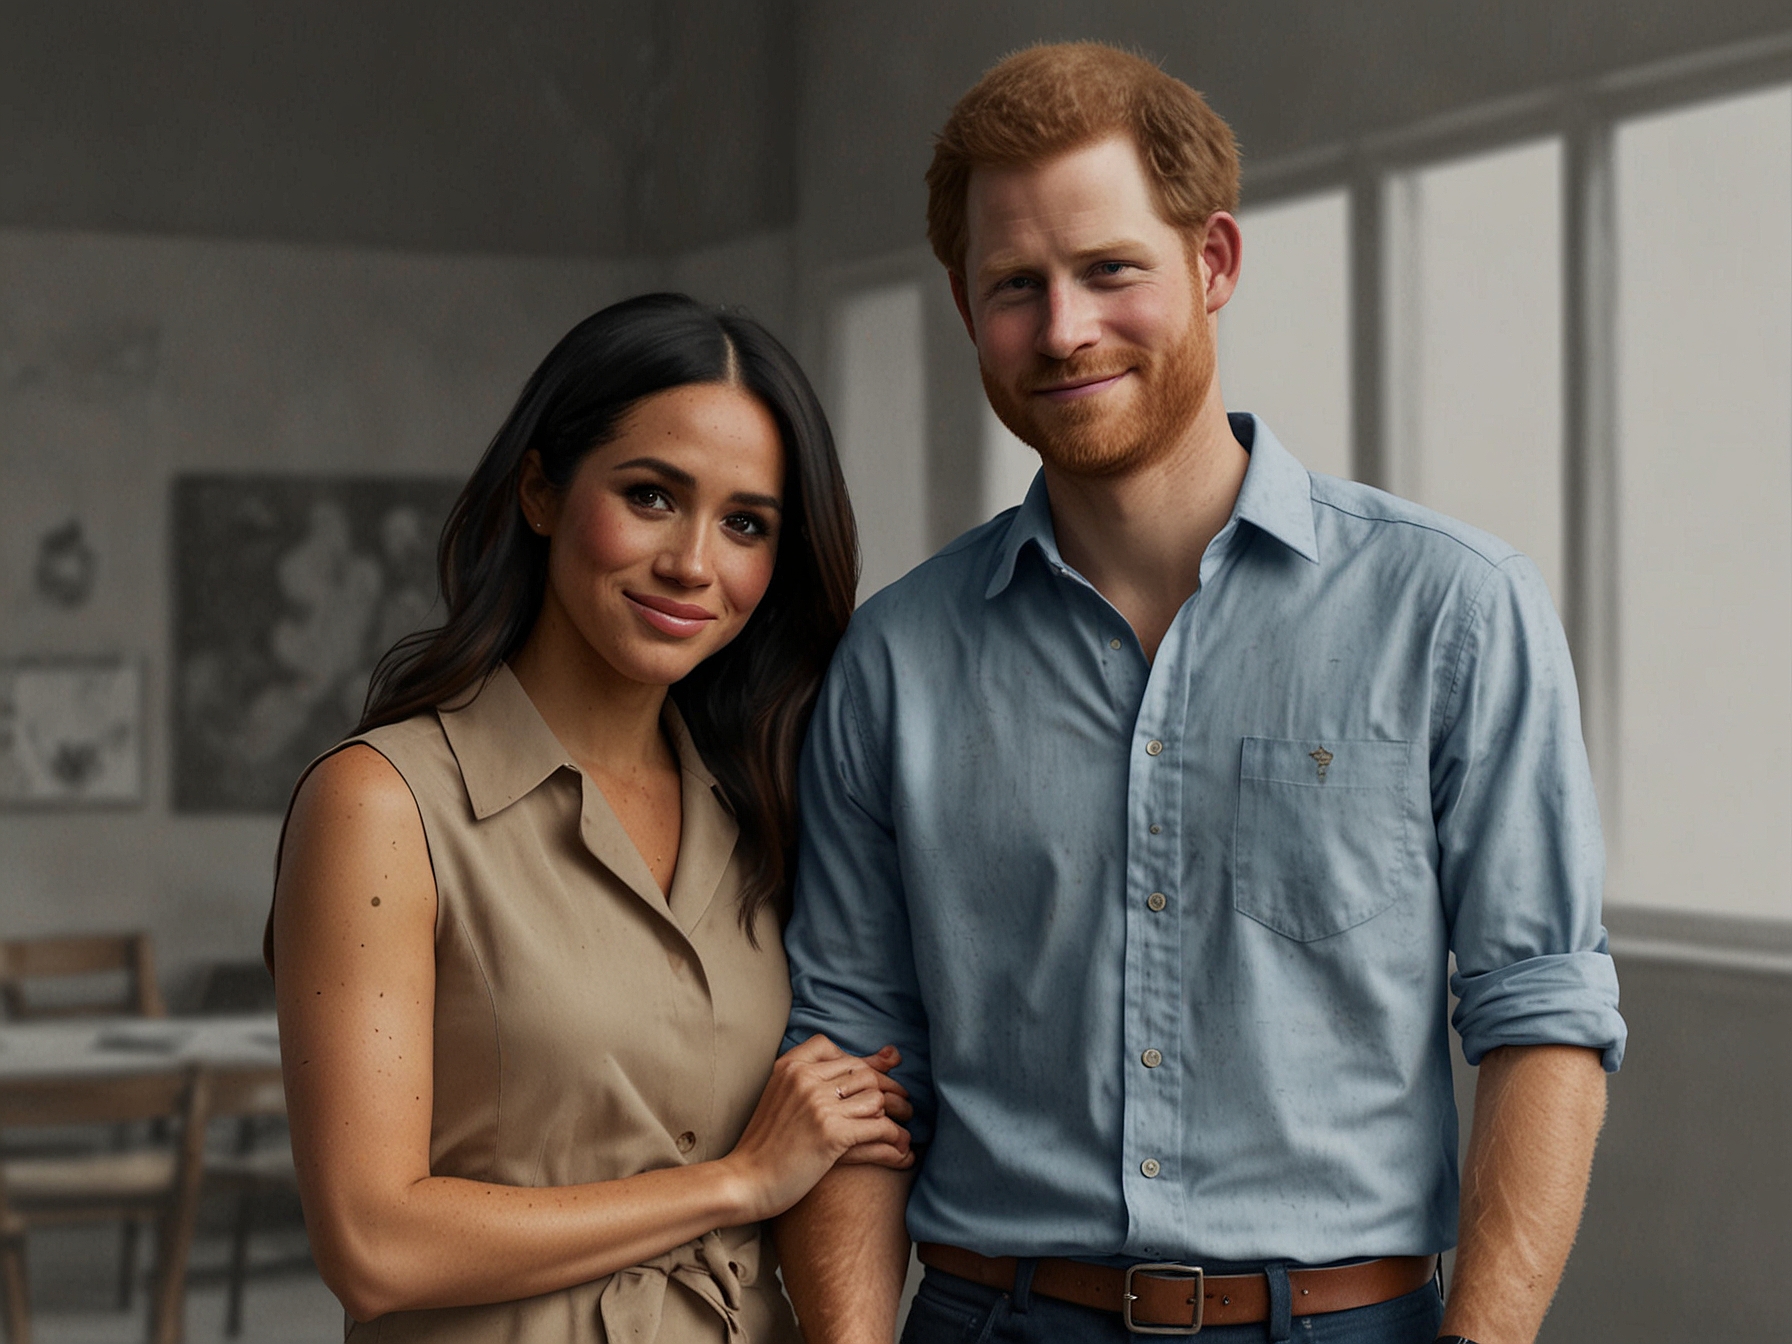 Prince Harry, visibly emotional, stands alongside Meghan Markle, both dressed casually, symbolizing their effort to lead a normal life away from royal protocols.